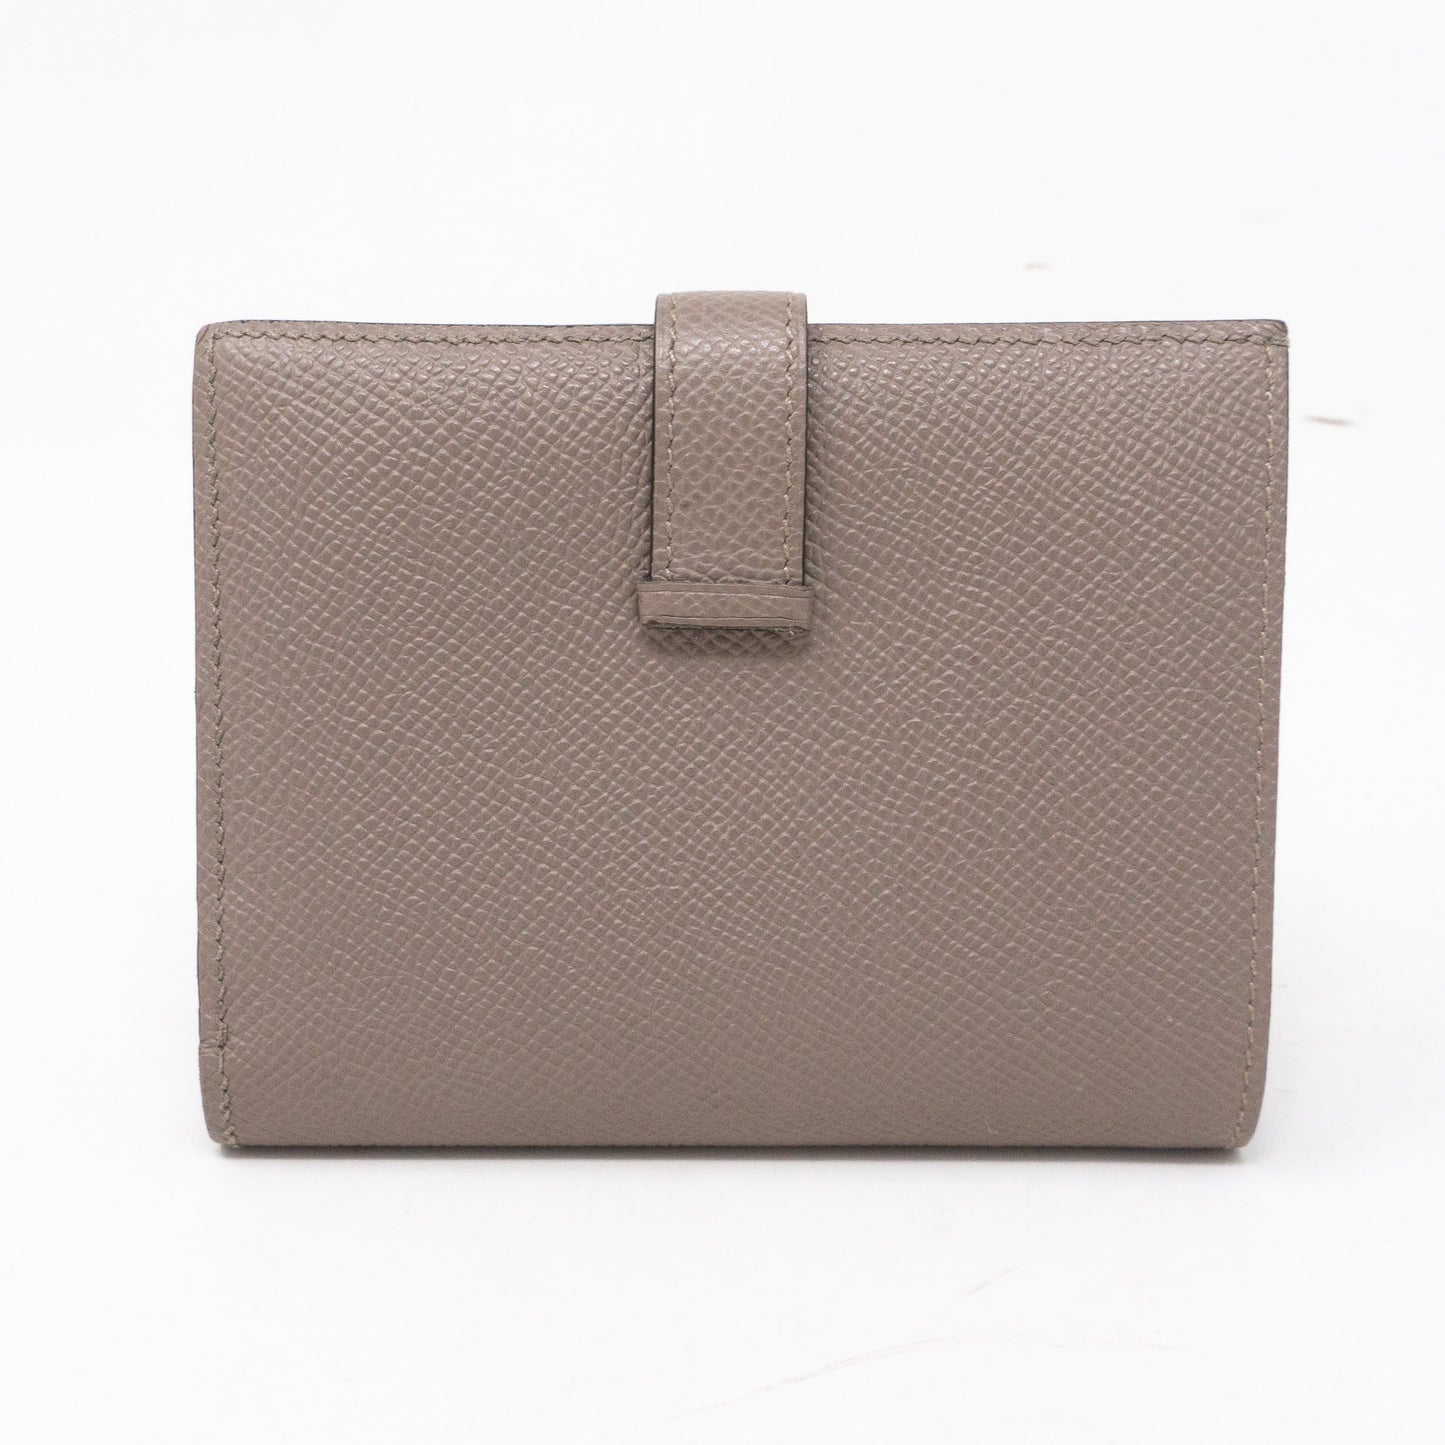 Bearn Compact Wallet Etain Leather